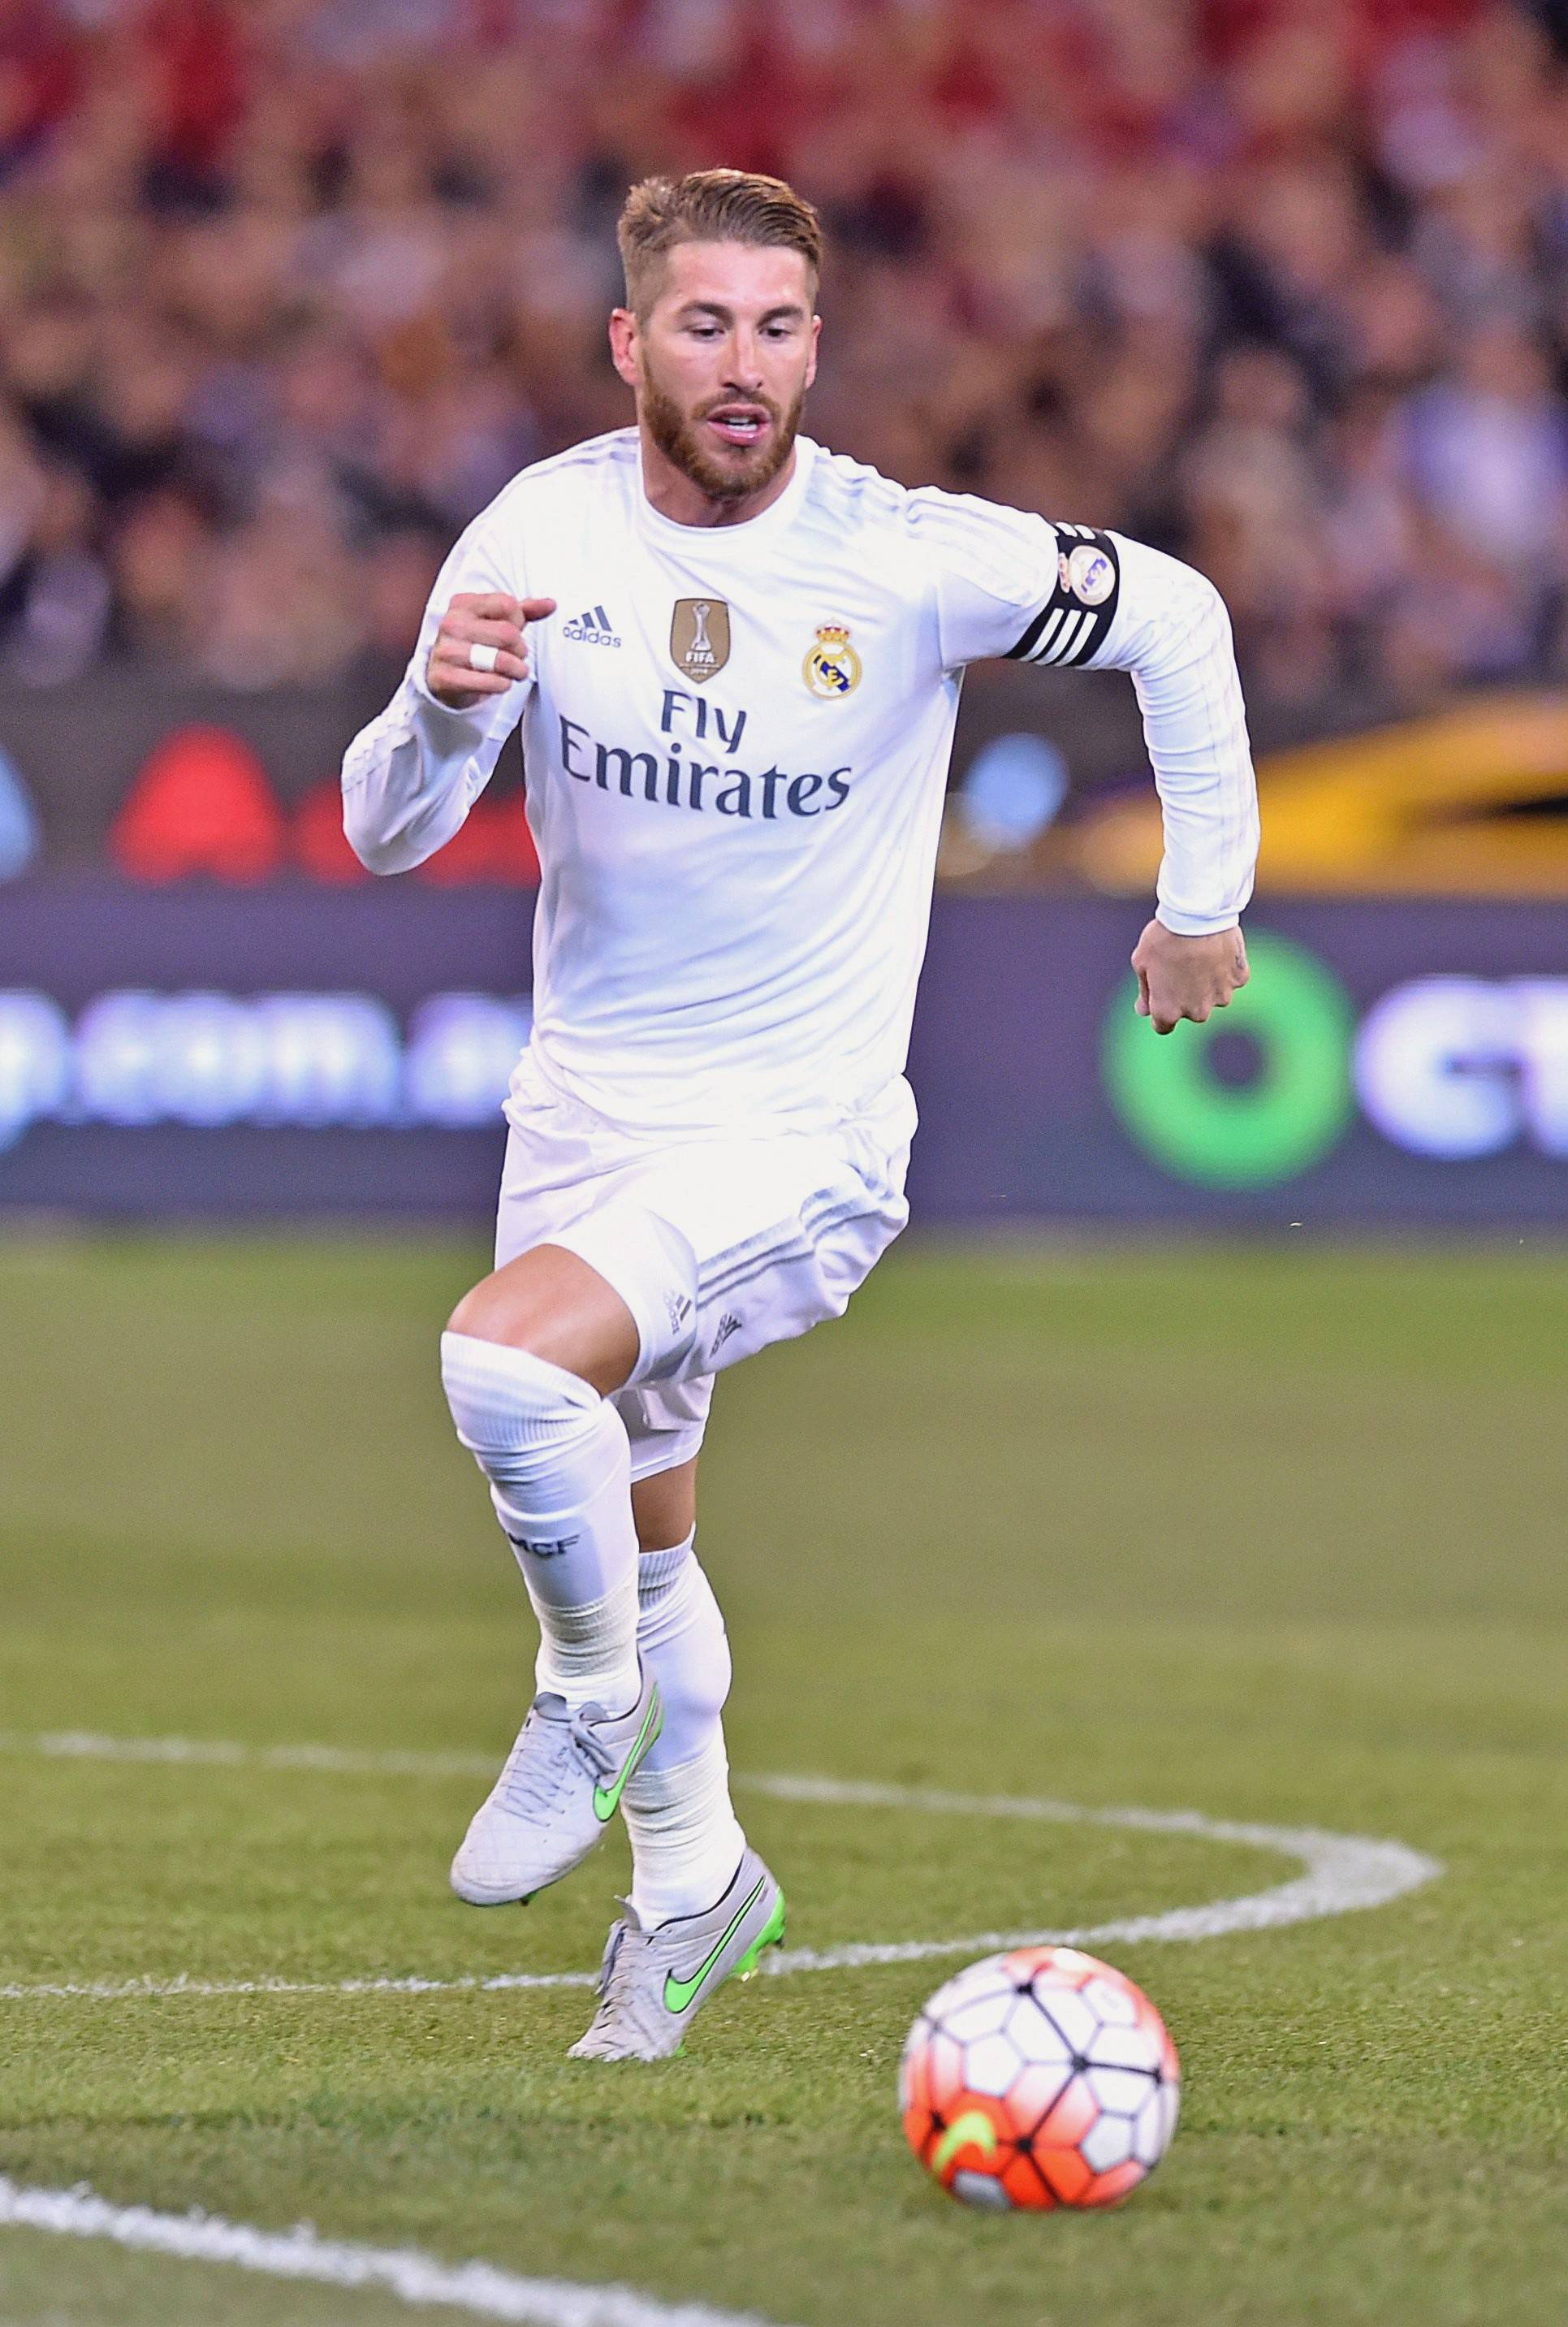 sergio ramos iphone wallpaper,player,sports,soccer player,sports equipment,football player